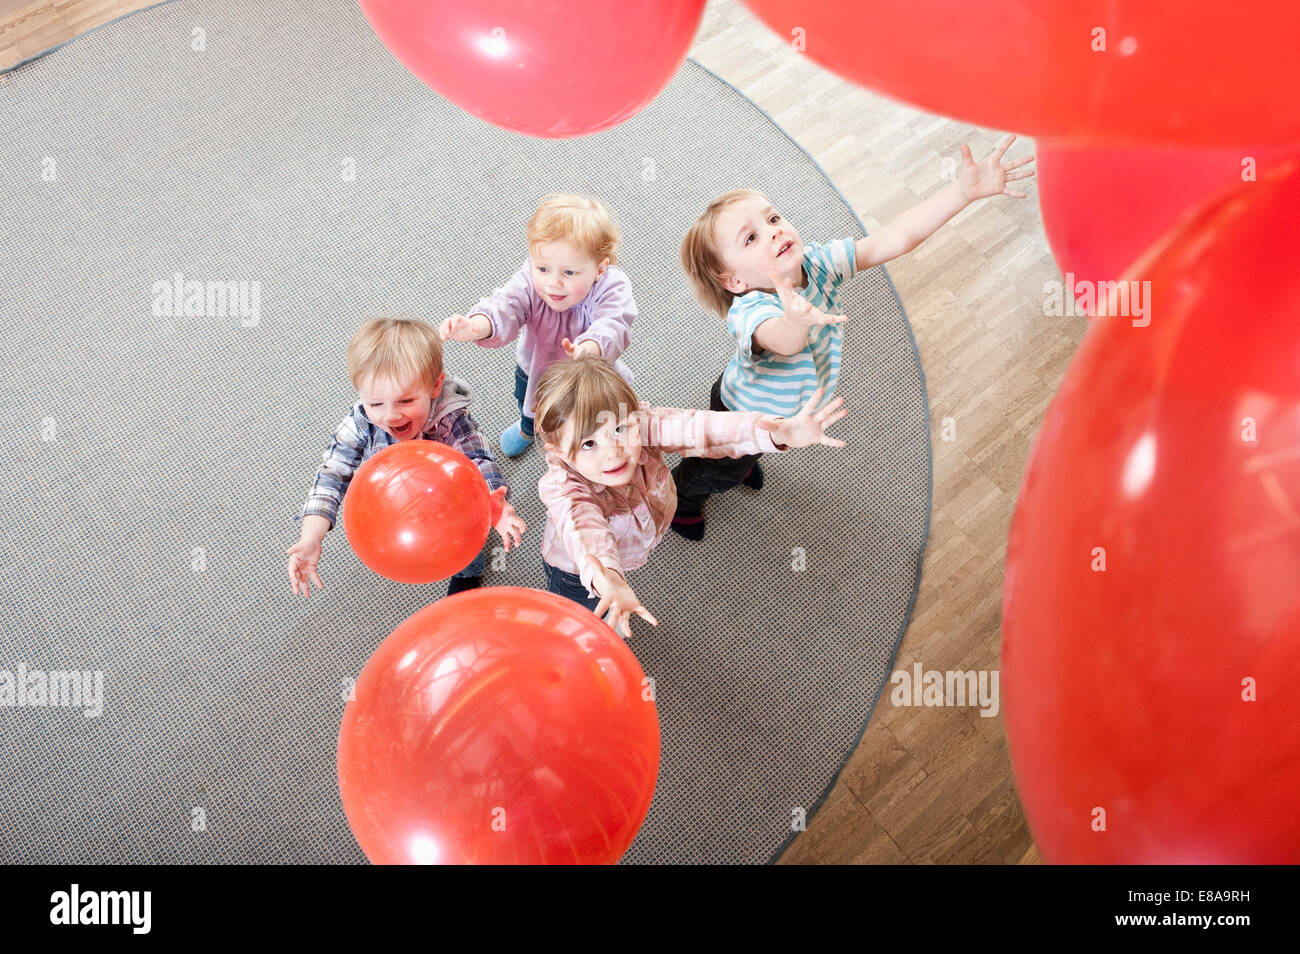 Four kids playing with red balloons in kindergarten, elevated view Stock Photo